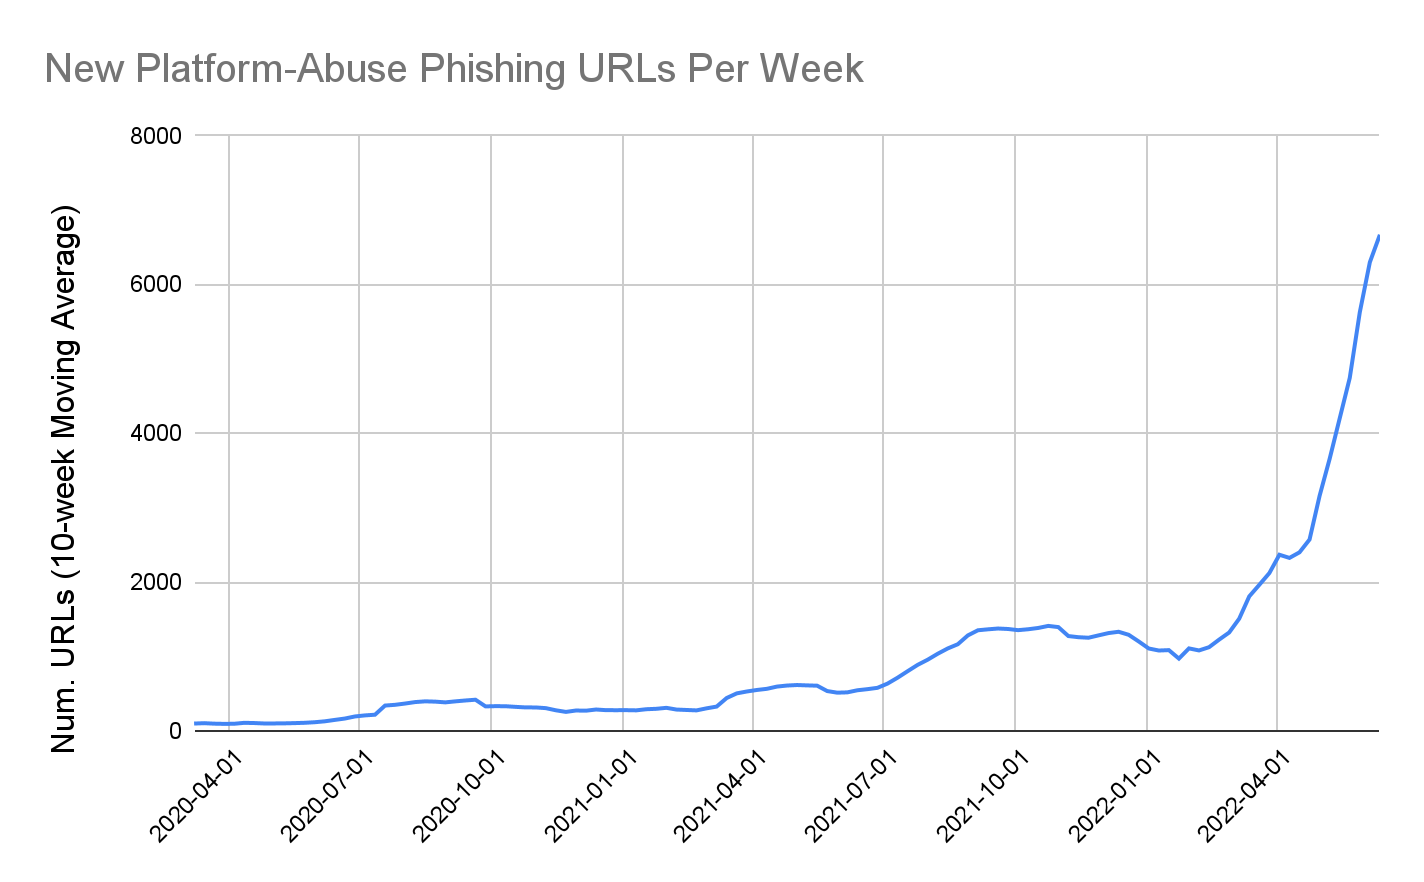 New Platform-Abuse Phishing URLs Per Week. The chart shows the number of URLs in terms of a 10-week moving average from April 2020 to April 2022, with a notable spike in the final period shown